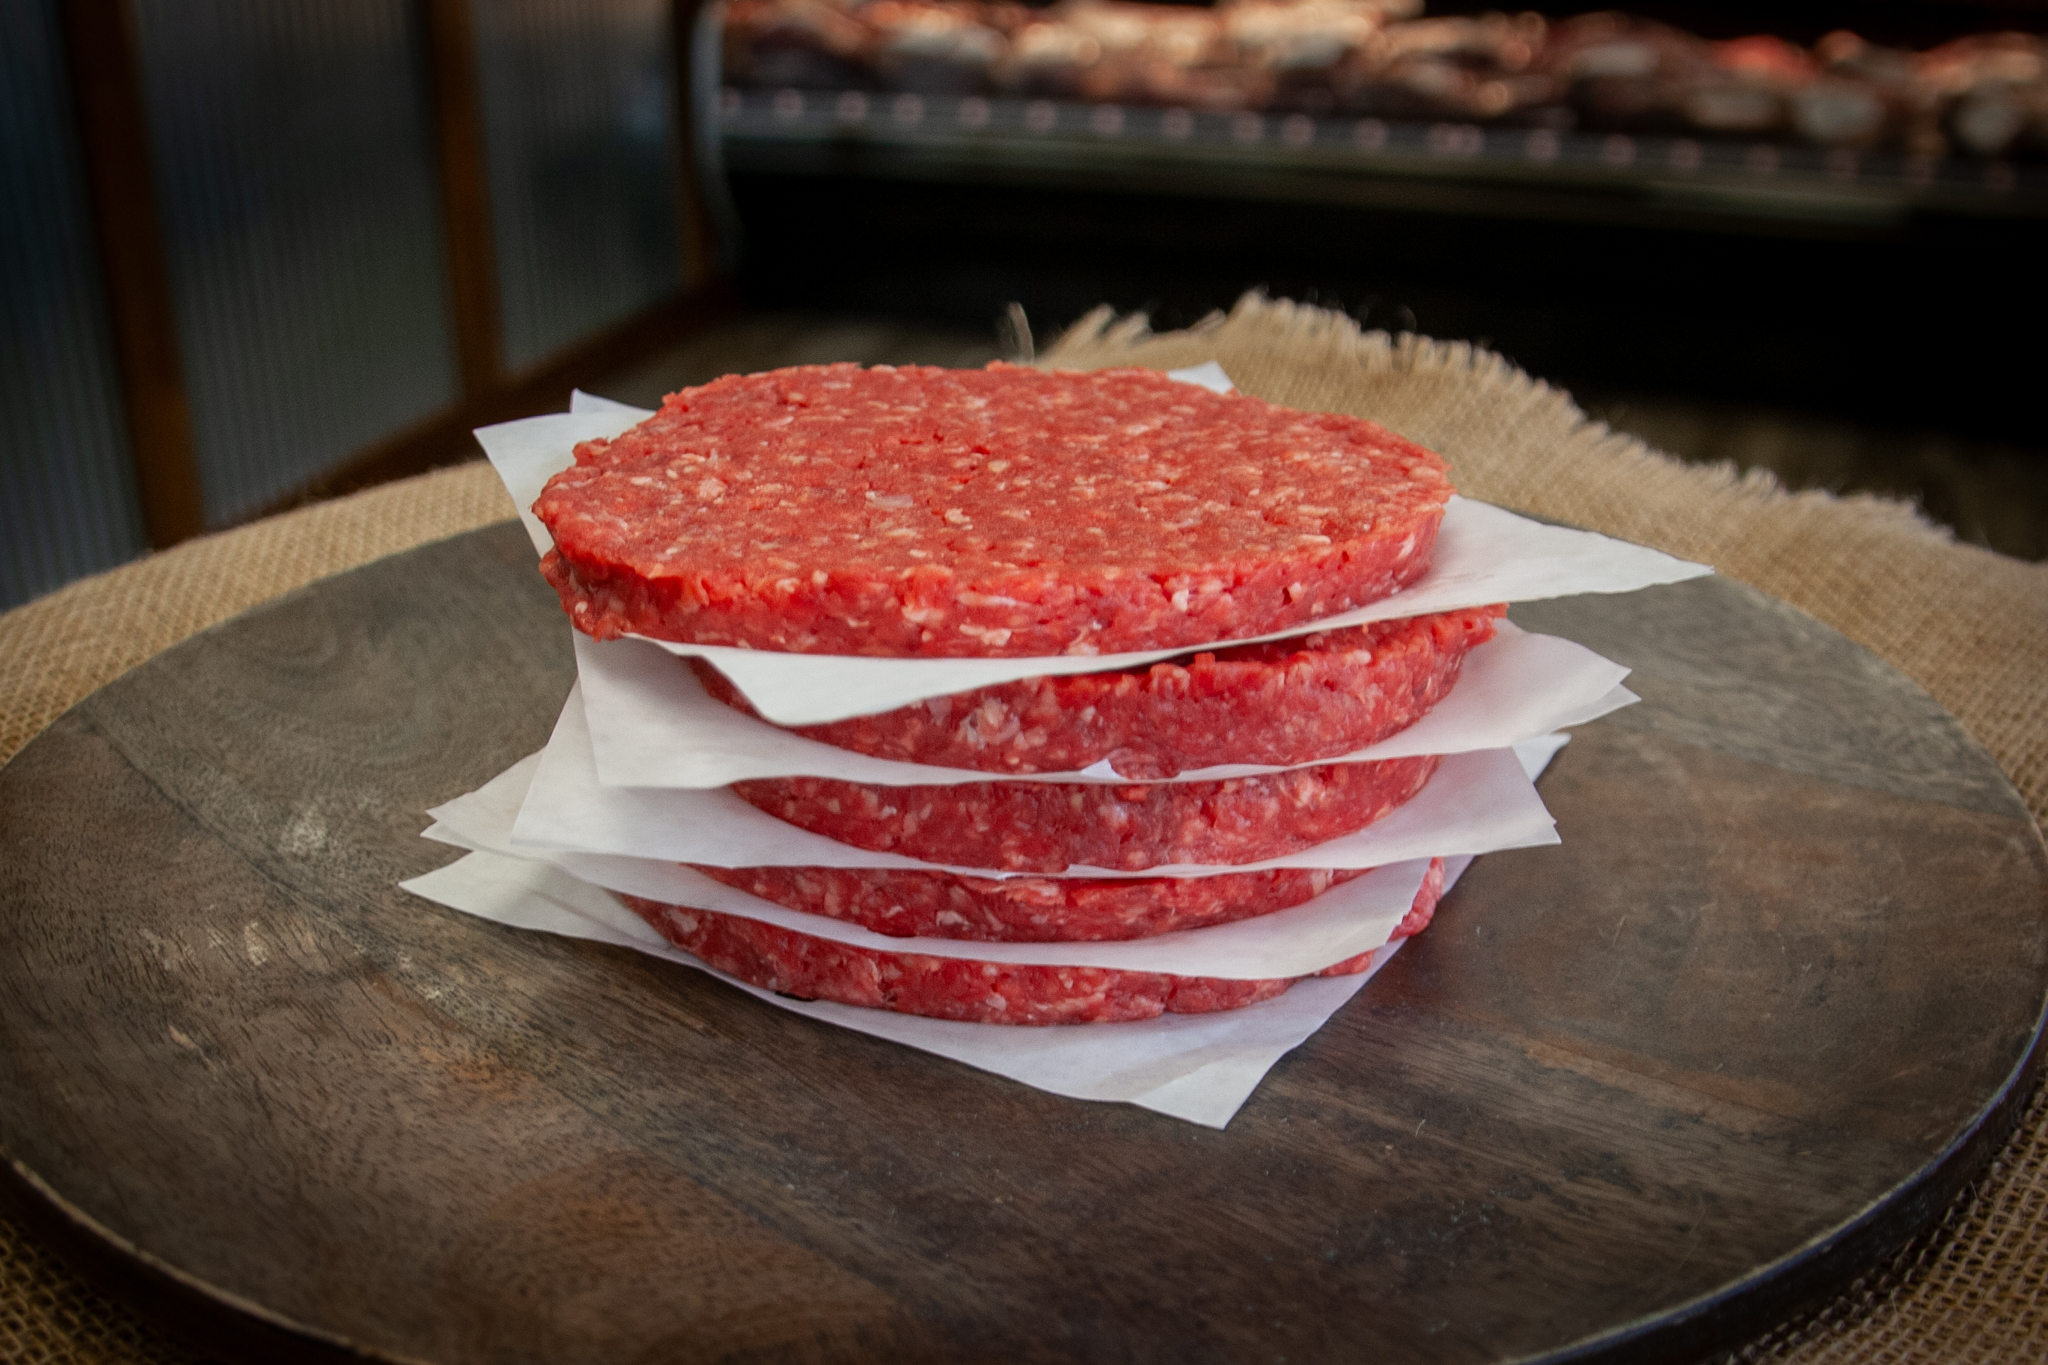 Ebert Grown Ground Beef Patties available at Salmon's Meat Products and online for shipping